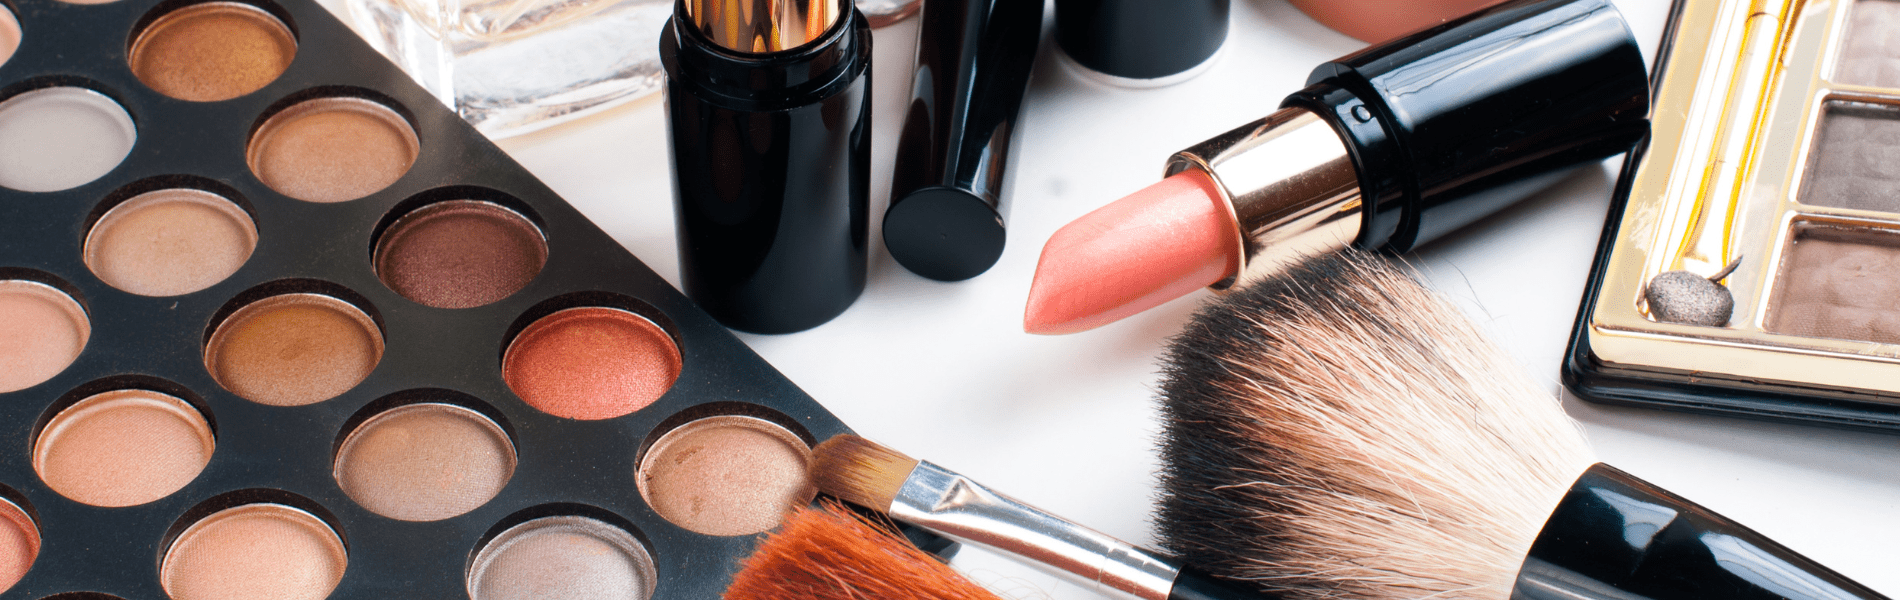 growing your beauty business